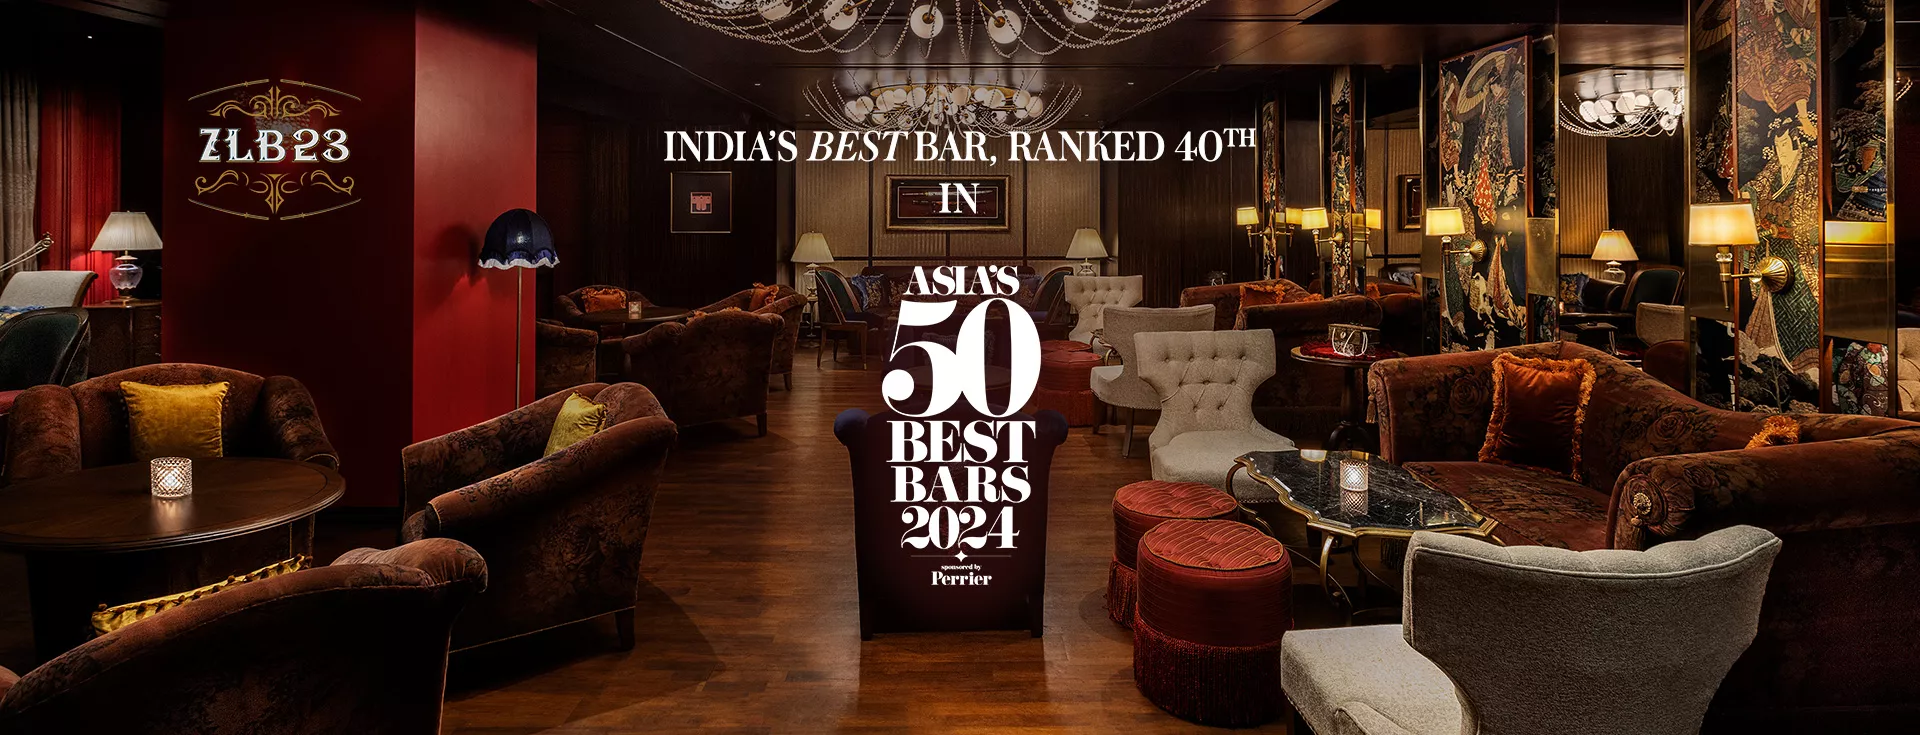 ZLB 23 at The Leela Palace Bengaluru recognised as The Best Bar in India at Asia’s 50 Best Bars 2024